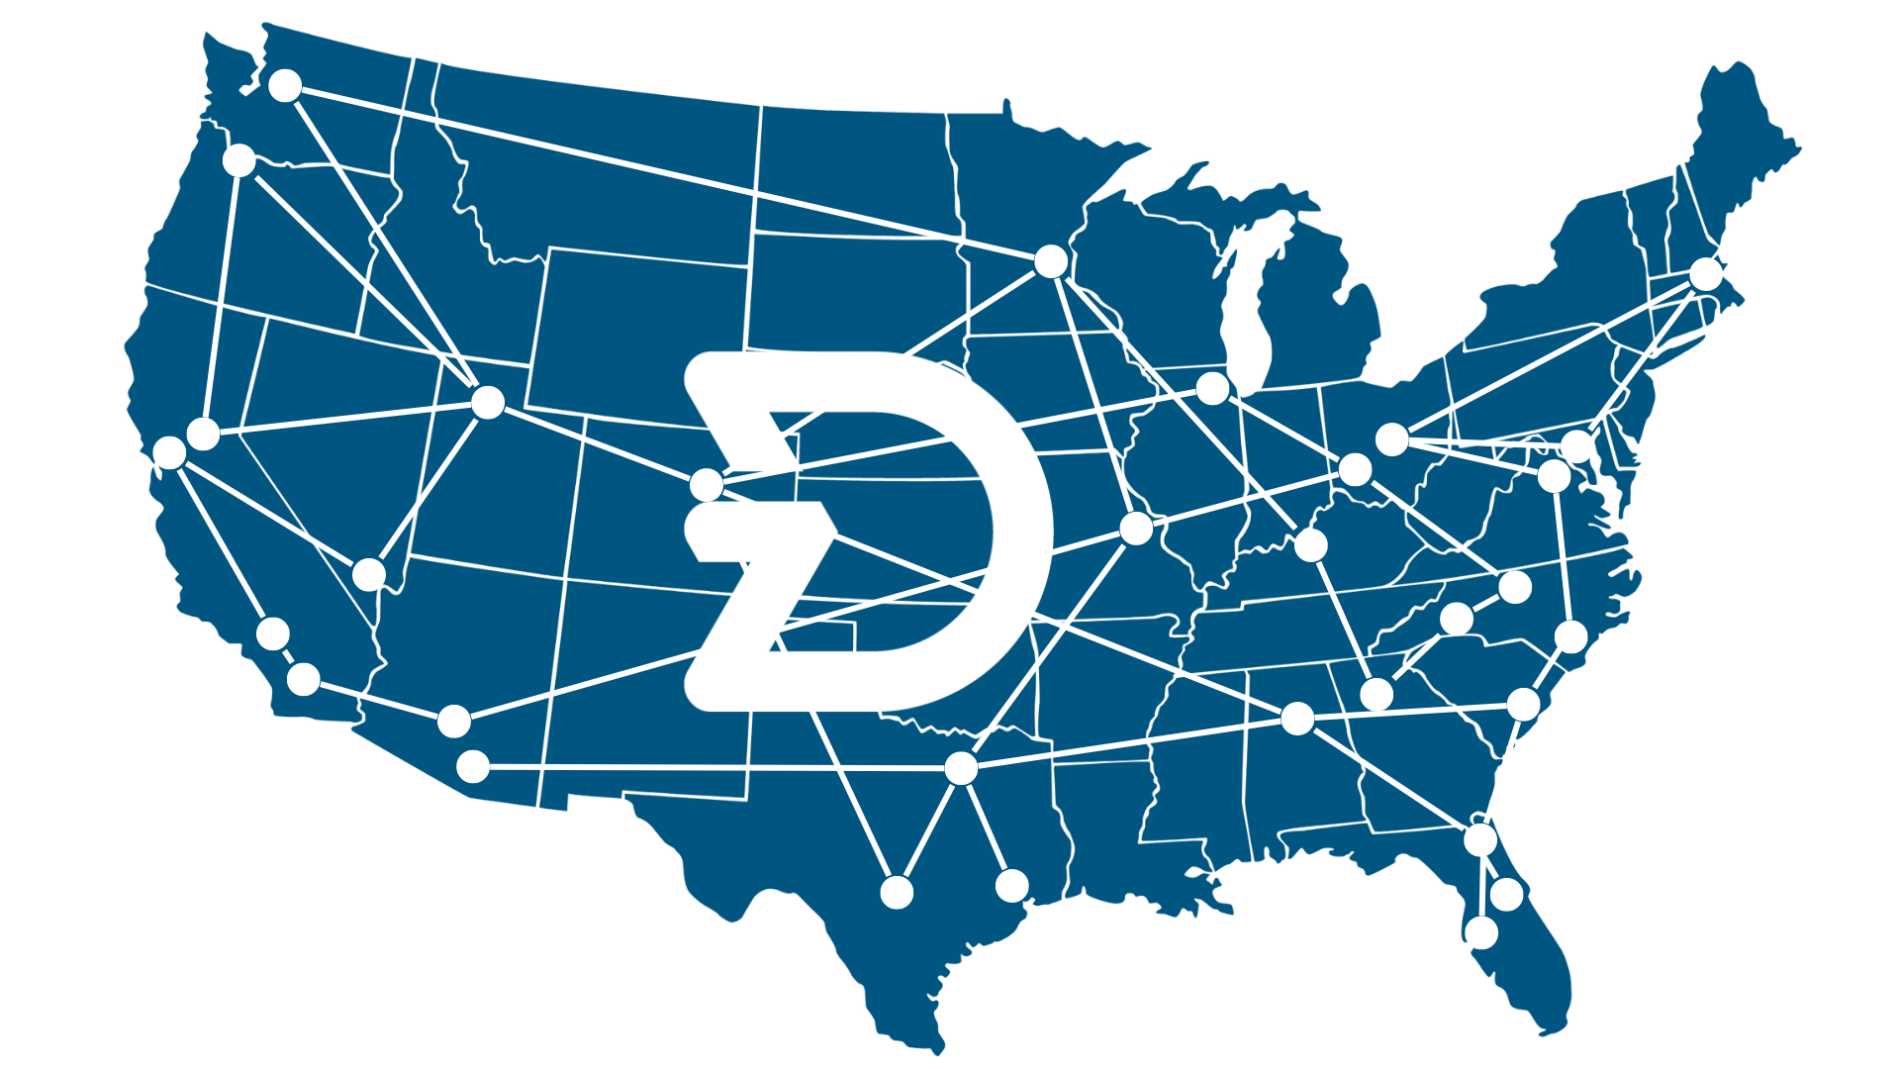 Map of the United States with Diverzify logo, dots indicating locations and lines connecting those dots.